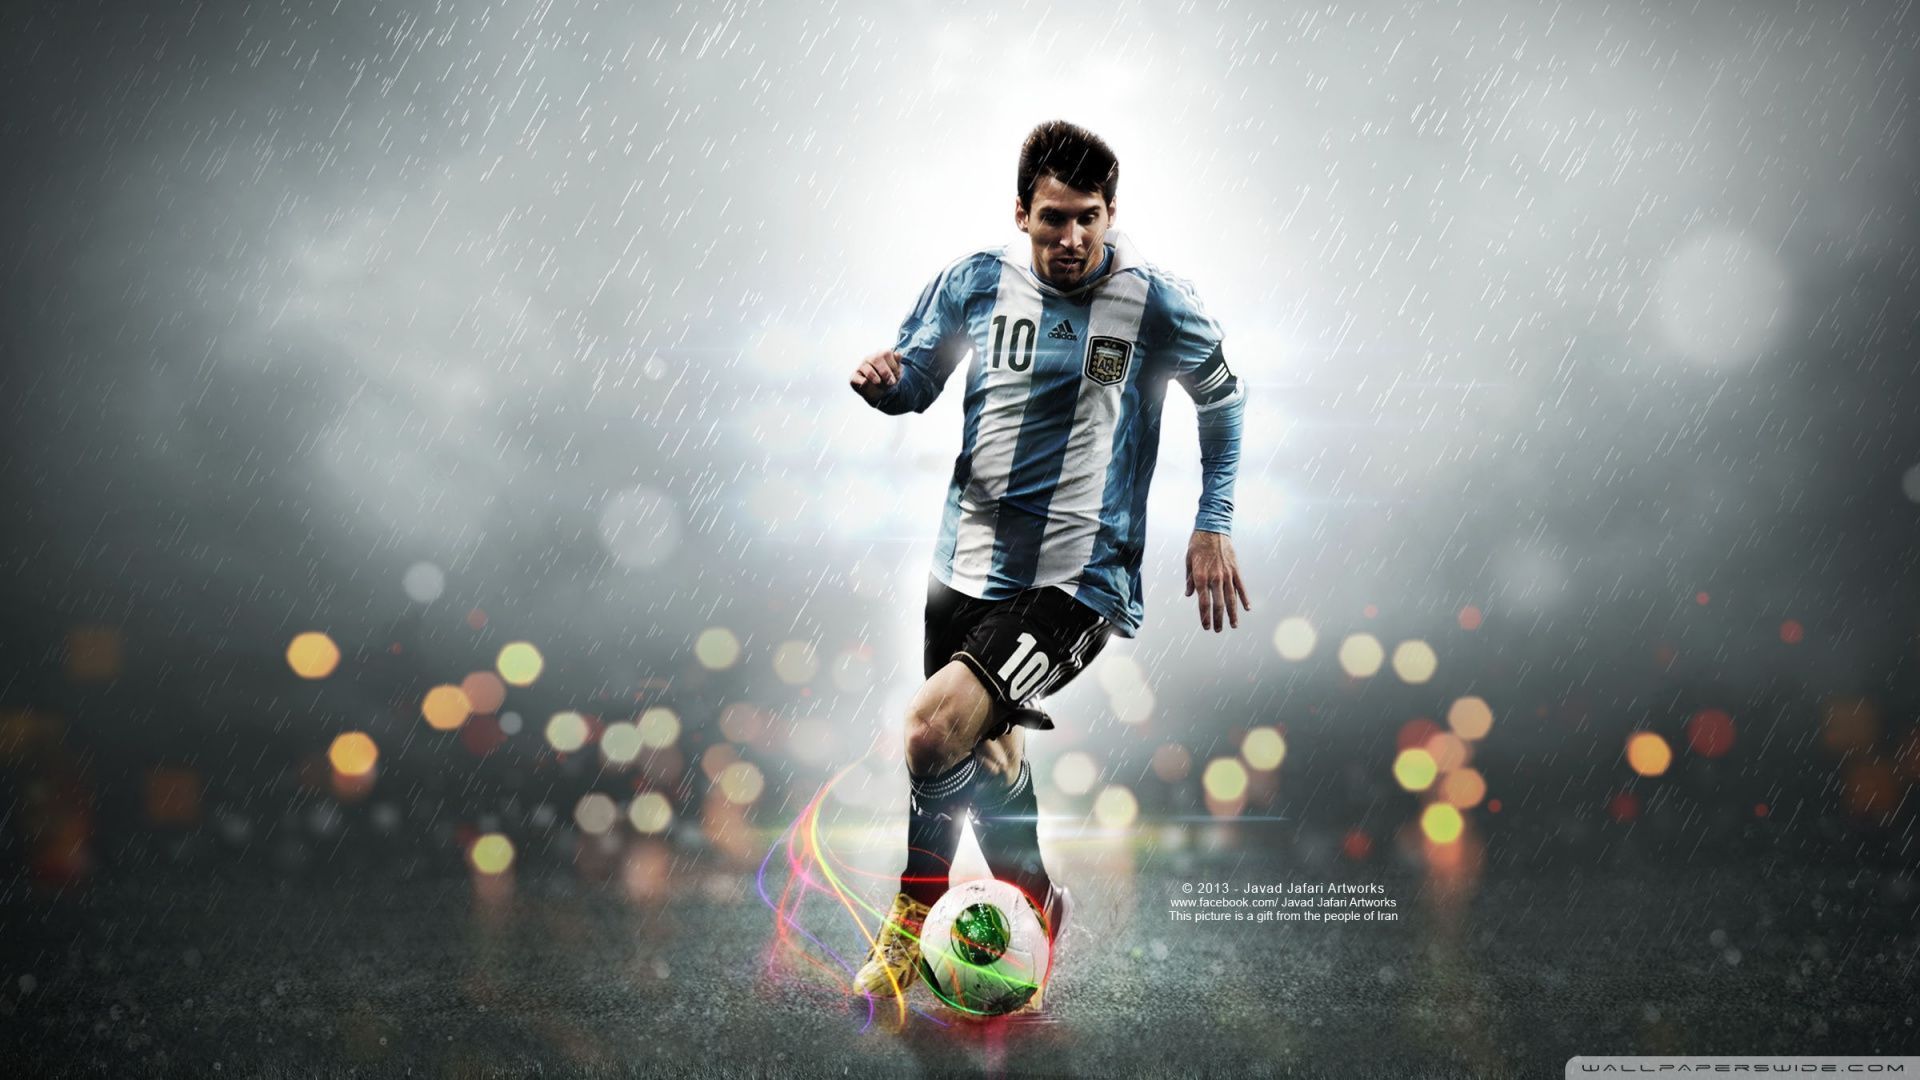 10 Lionel Messi Hd Wallpapers 2014 | Free Quotes